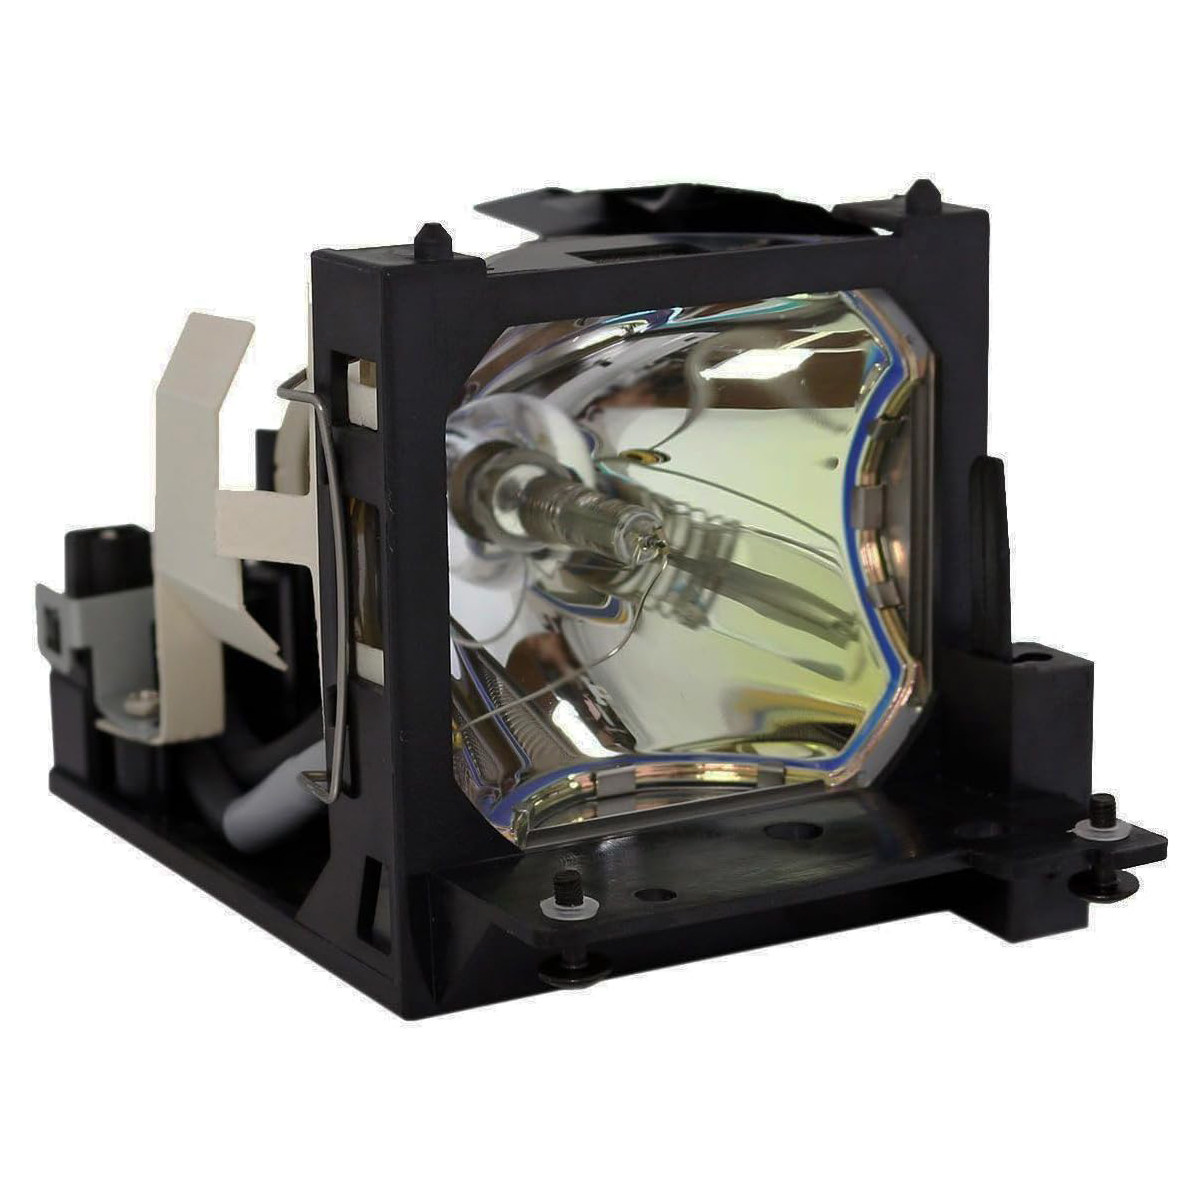 Replacement Projector lamp 456-226 For Dukane Projector